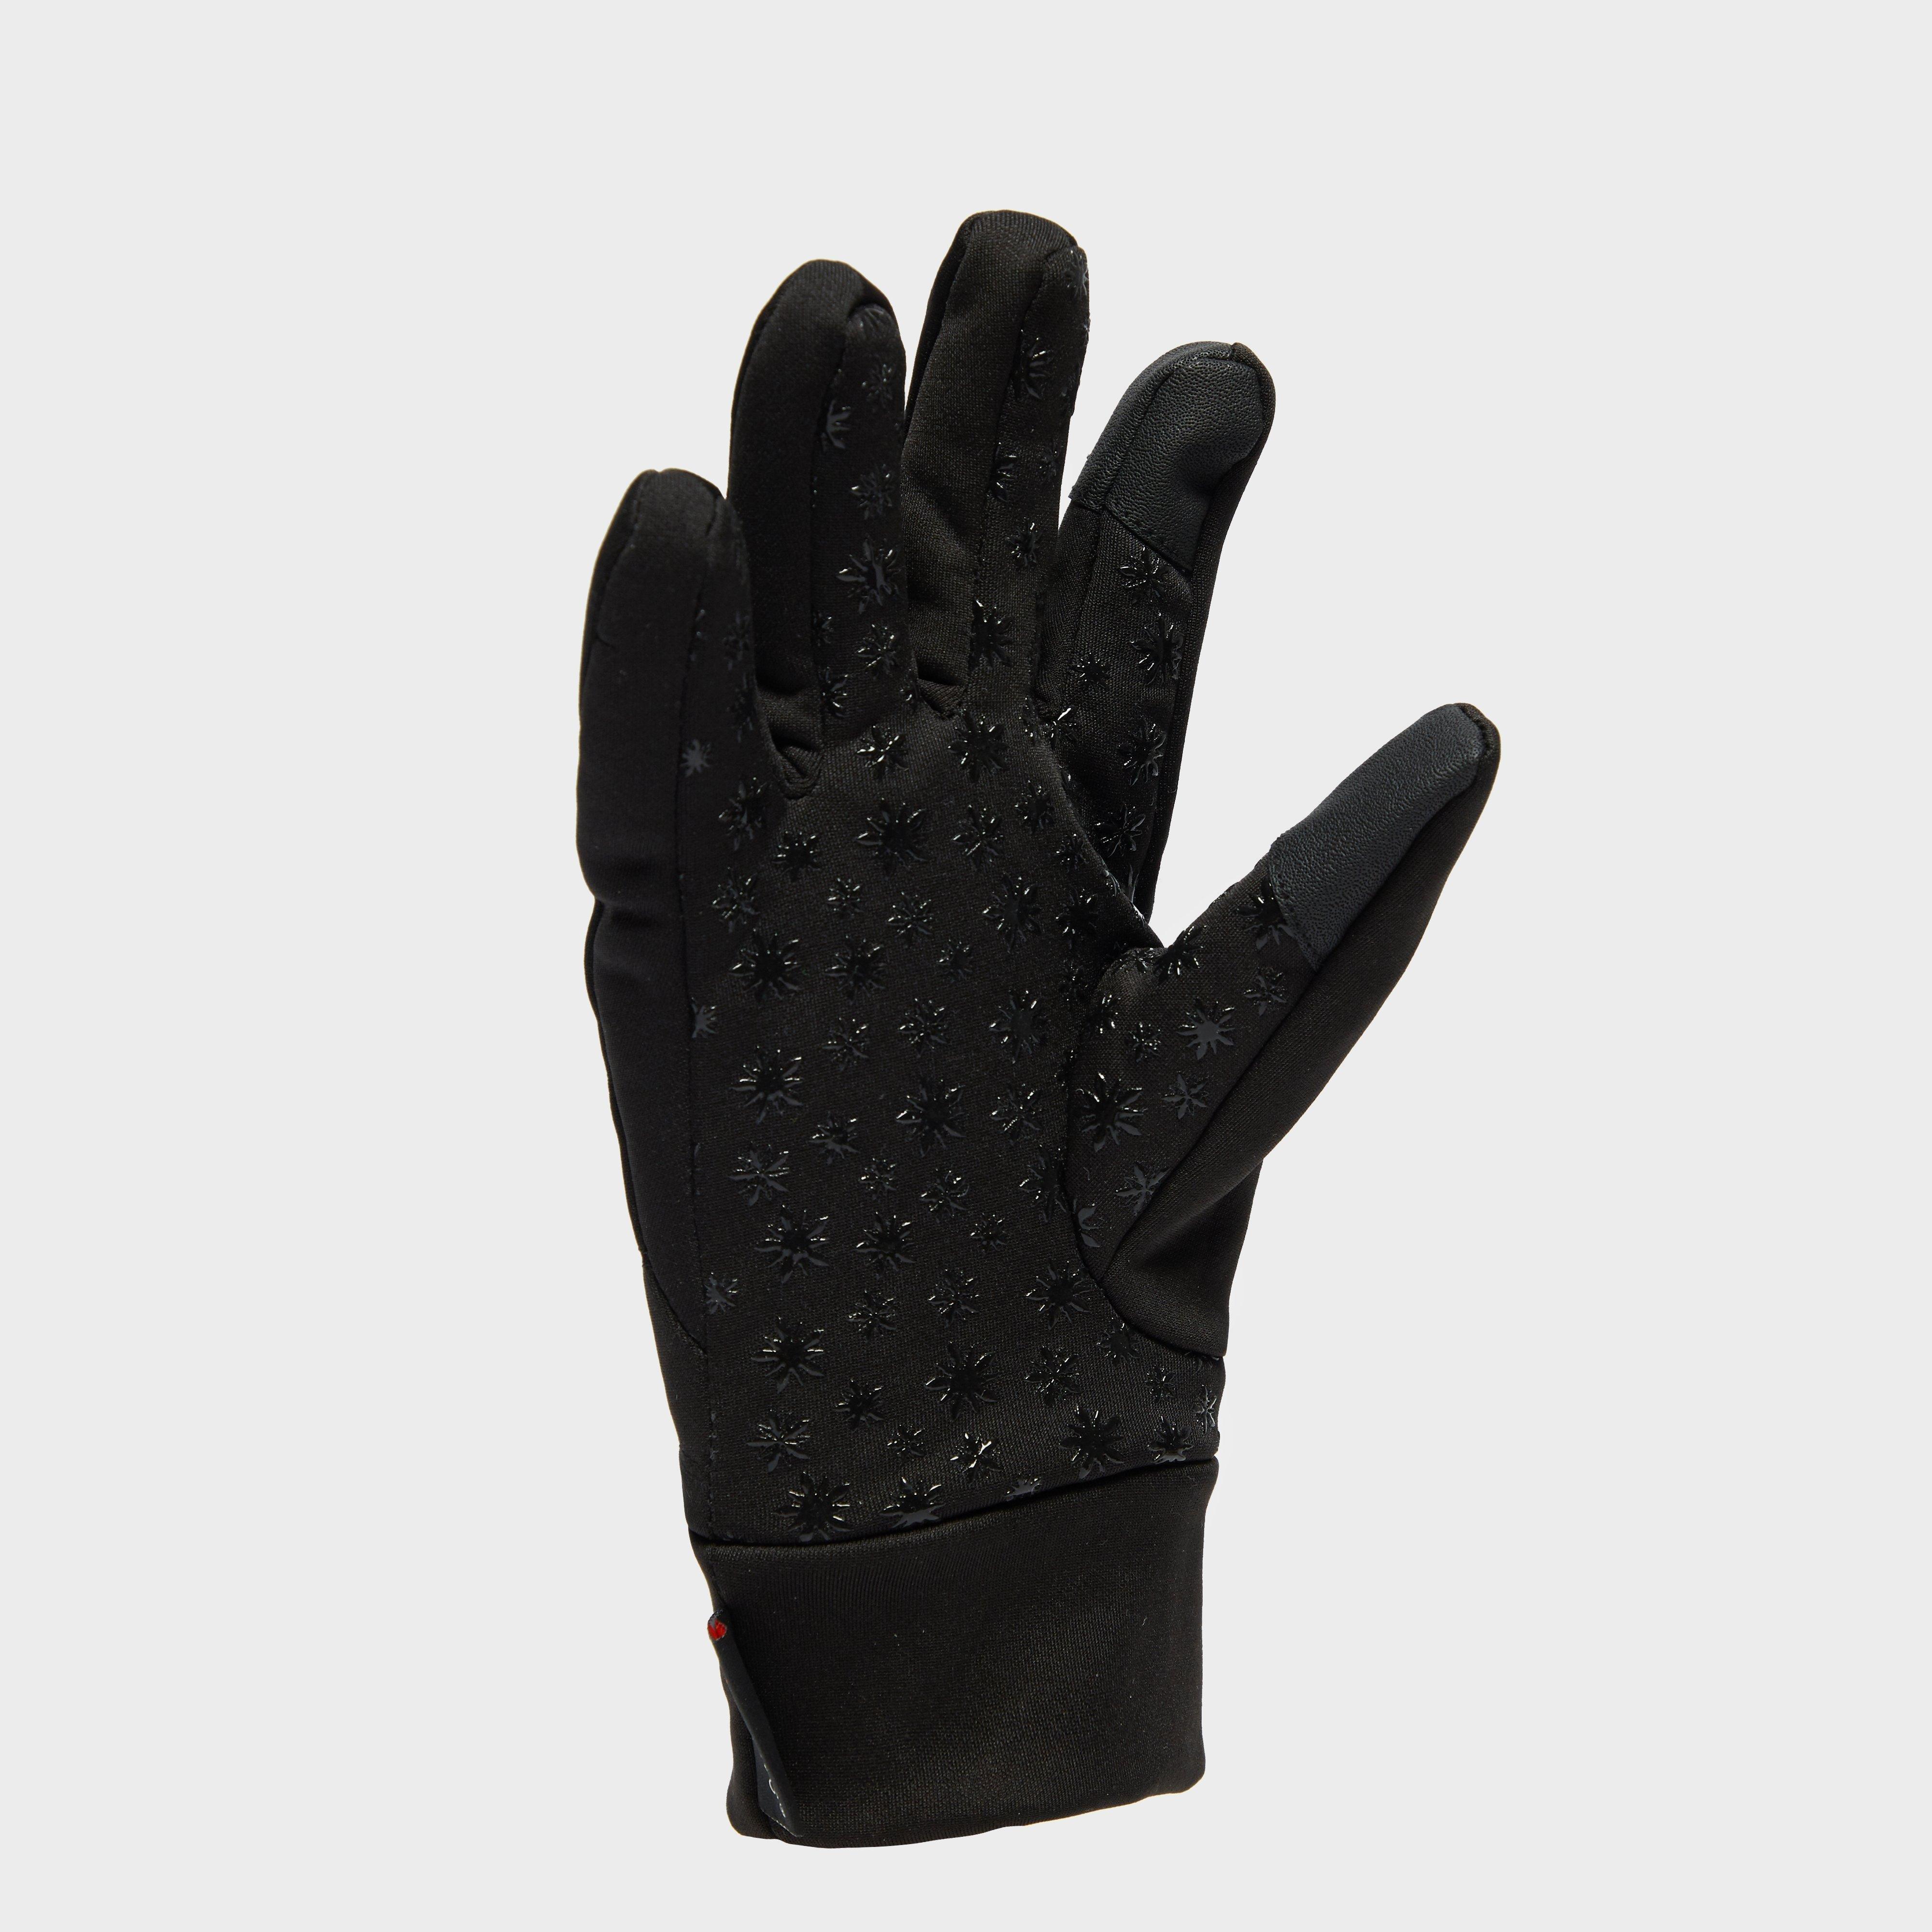 Extremities Women's Super Thick Gloves Review